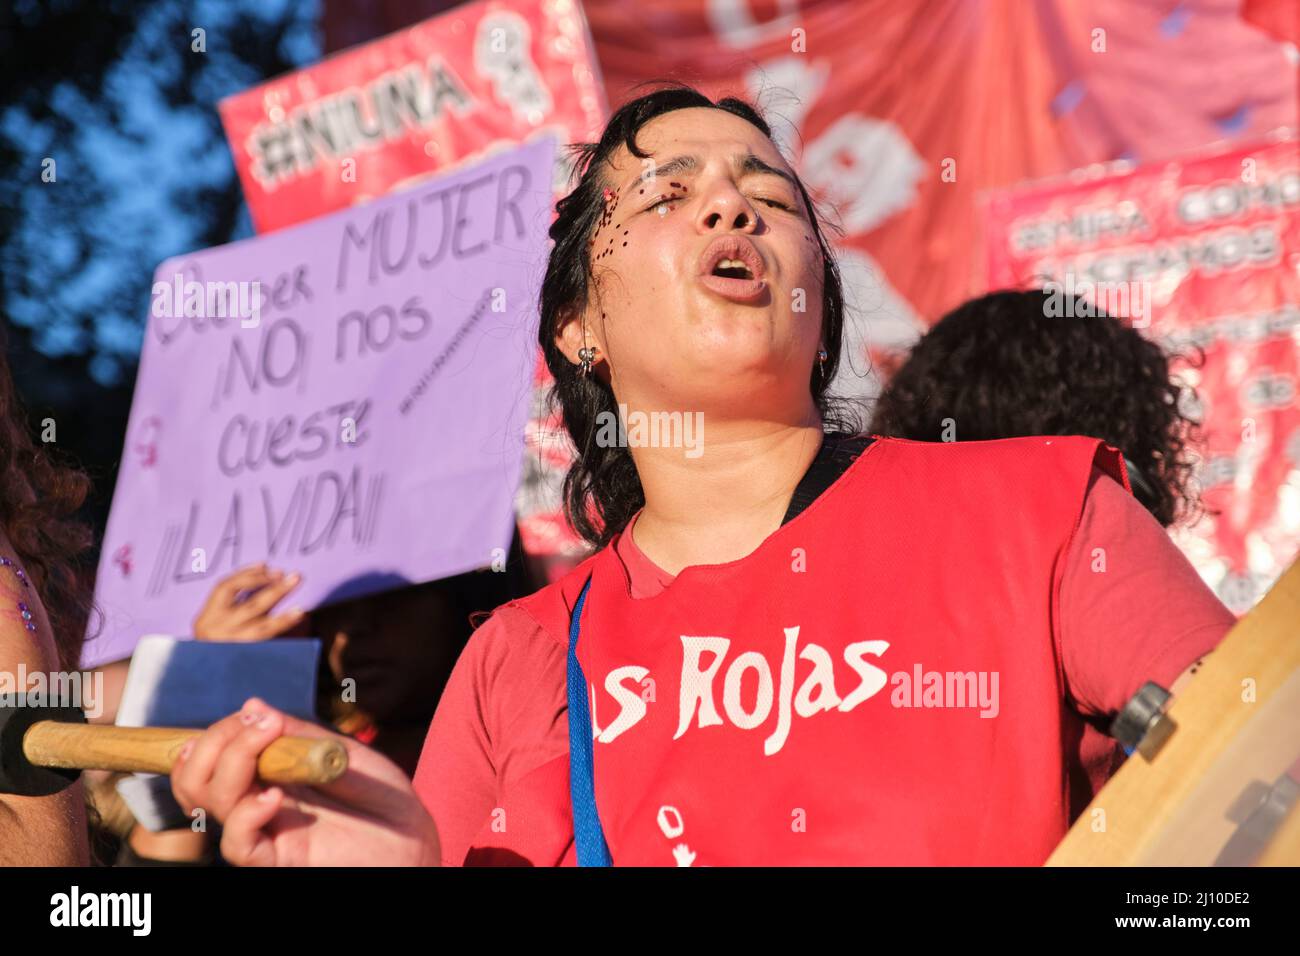 Buenos Aires, Argentina; March 8, 2022: International feminist strike; young woman playing music and chanting slogans, claiming the rights of women Stock Photo